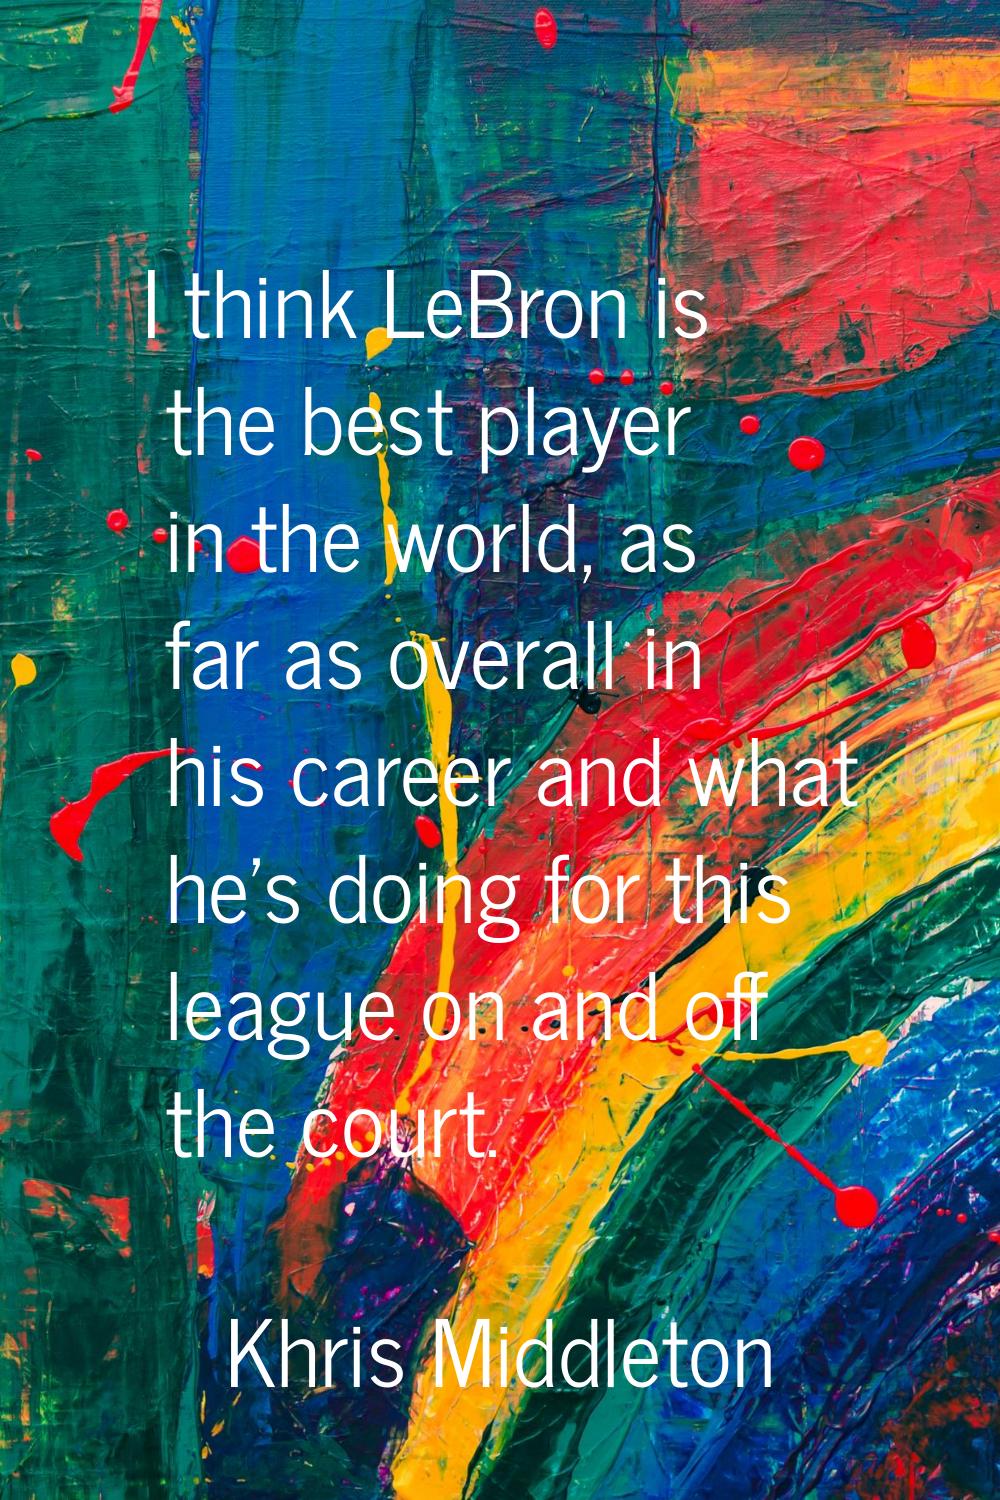 I think LeBron is the best player in the world, as far as overall in his career and what he's doing